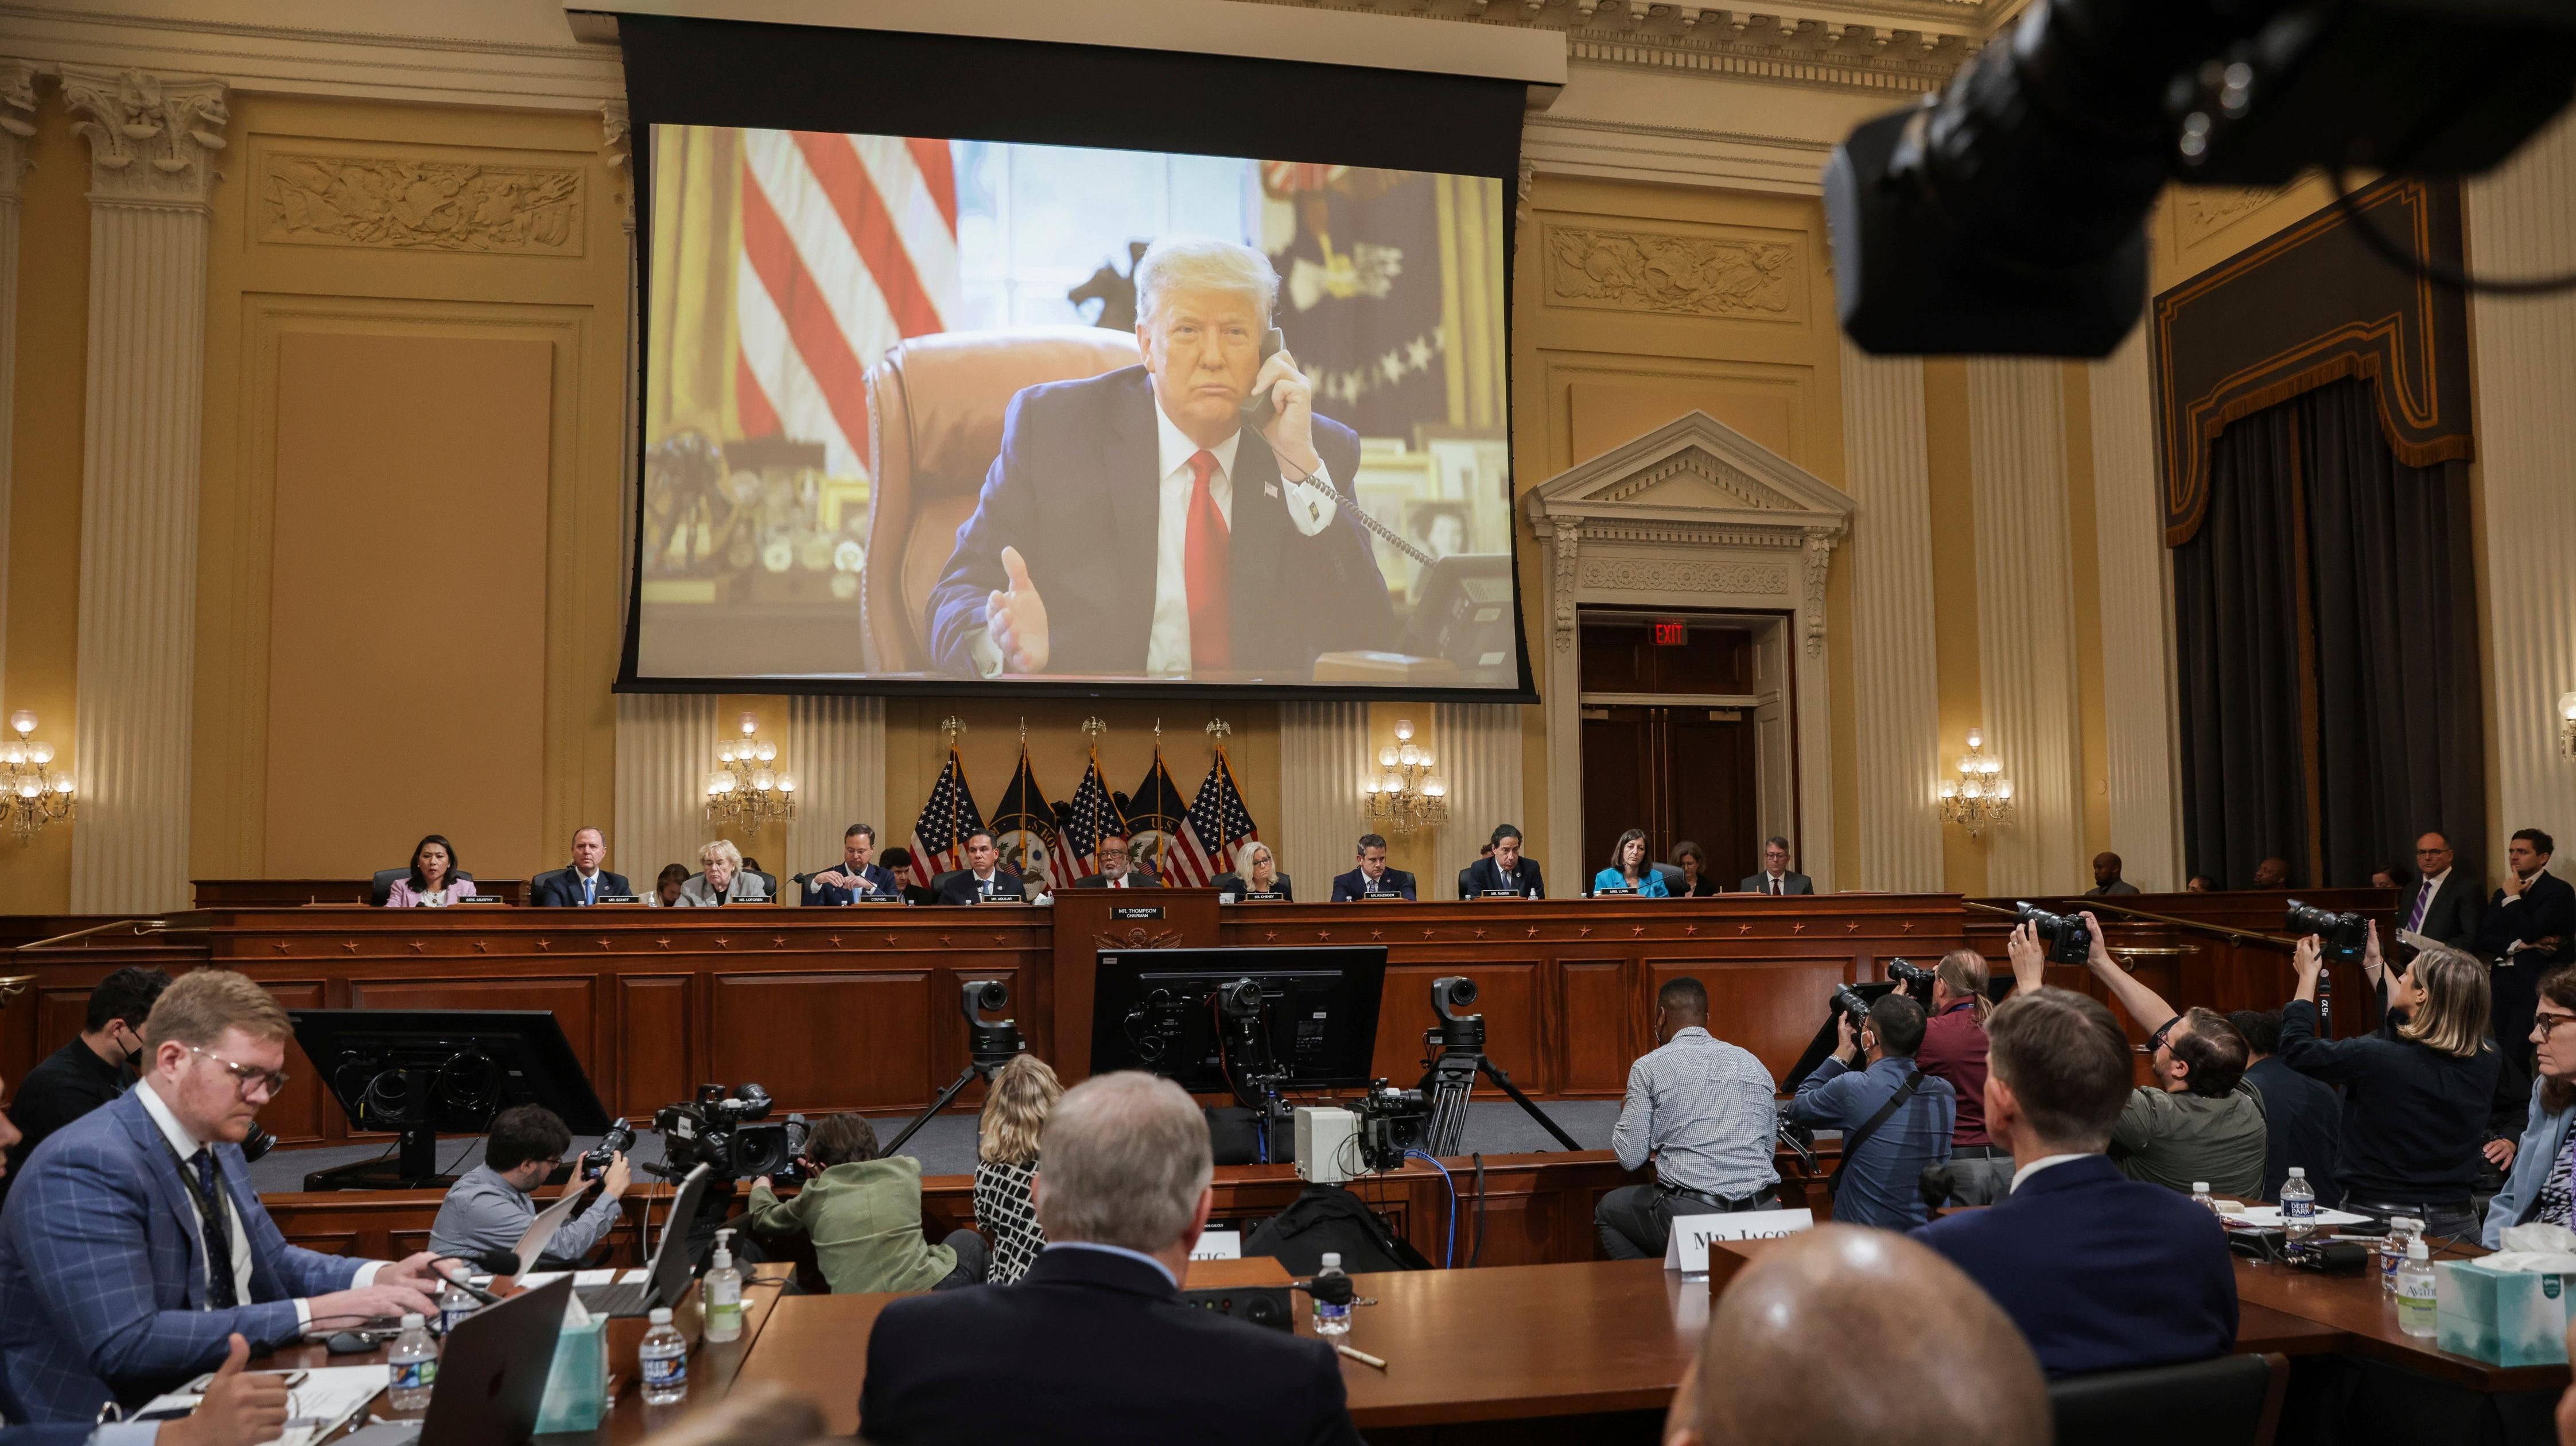 Video of former President Donald J. Trump plays on the screen during the Select Committee to Investigate the January 6th Attack on the U.S. Capitol hearing happening in Washington, DC on June 16, 2022. (Photo: Sipa USA, AP)